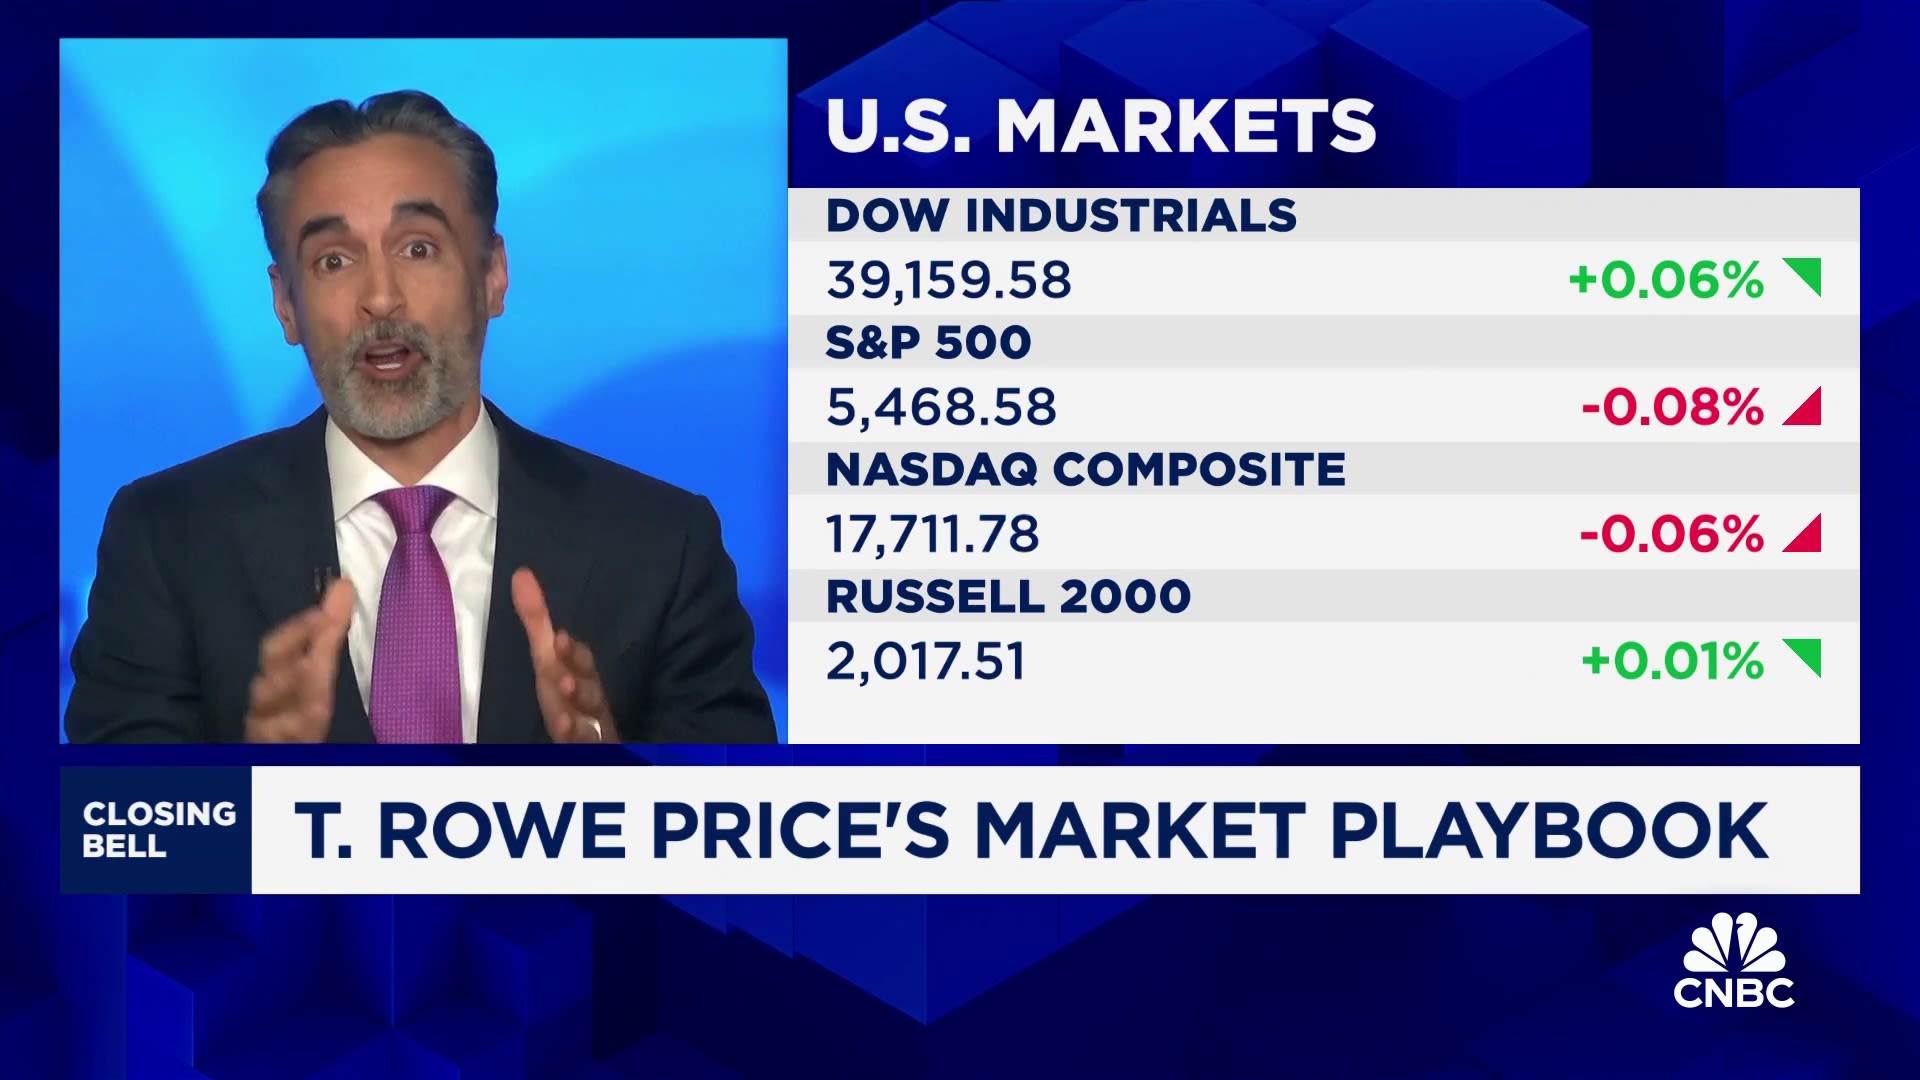 Now is a time to own growth and sell some, says T. Rowe